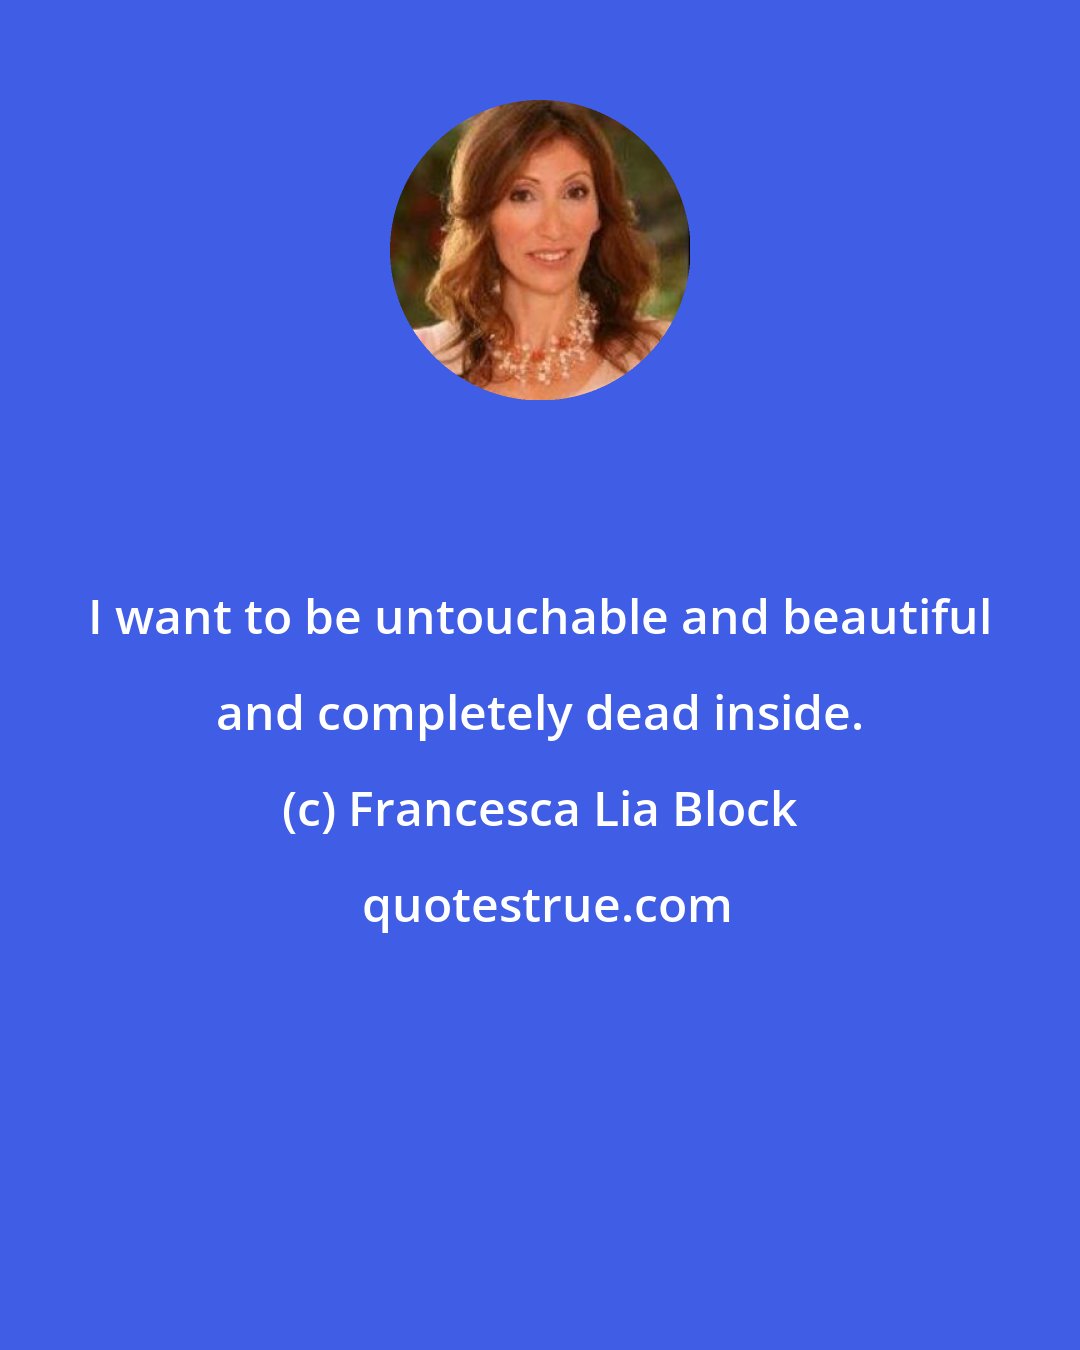 Francesca Lia Block: I want to be untouchable and beautiful and completely dead inside.